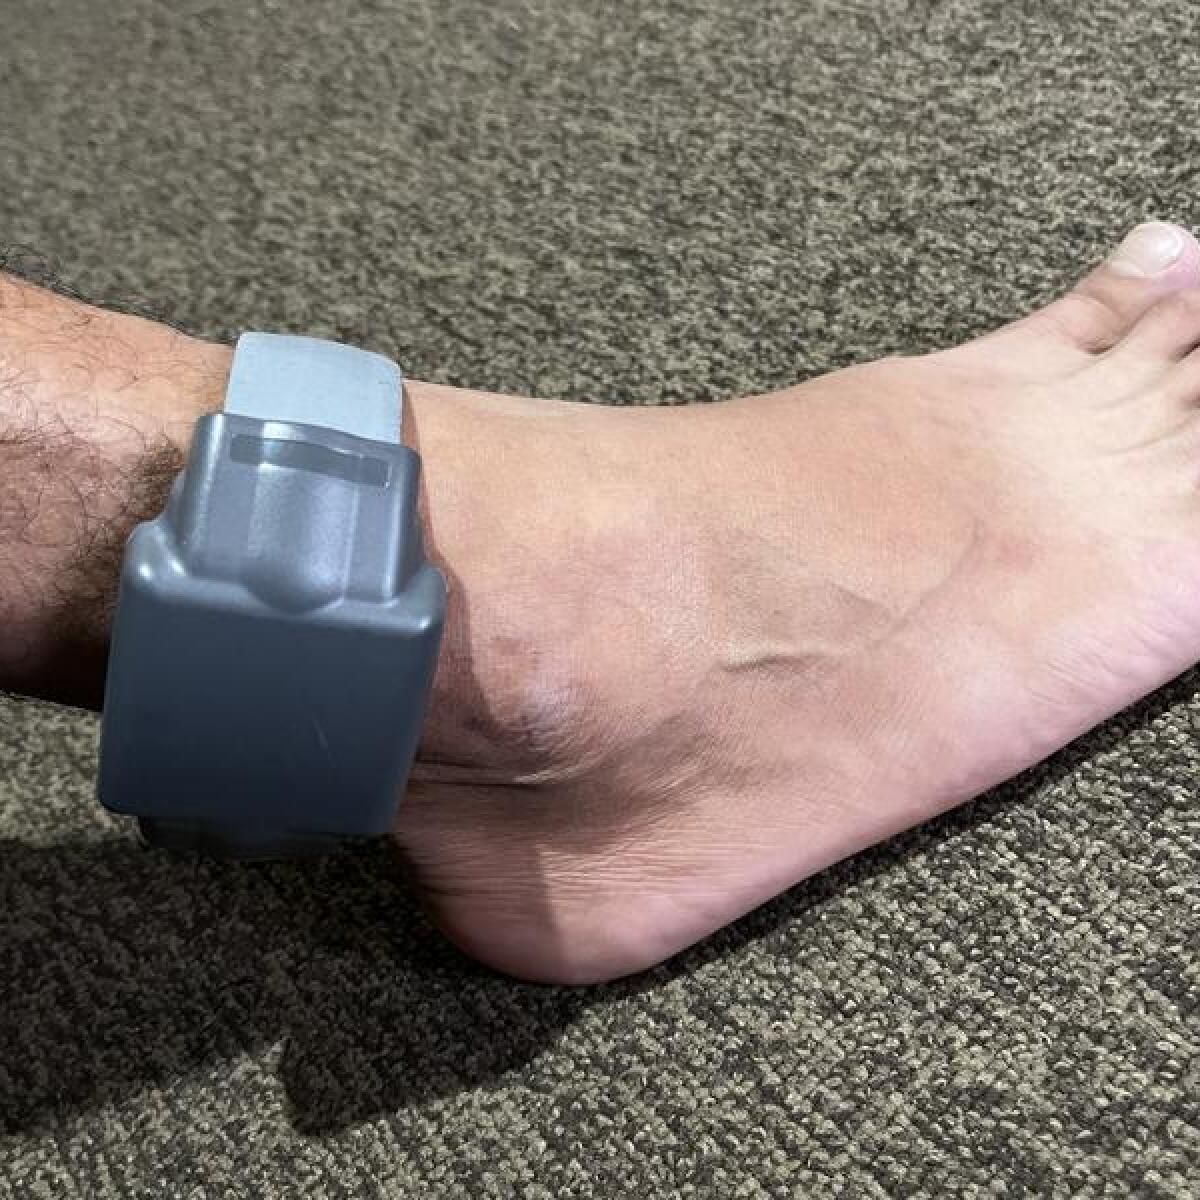 An electronic monitoring ankle bracelet